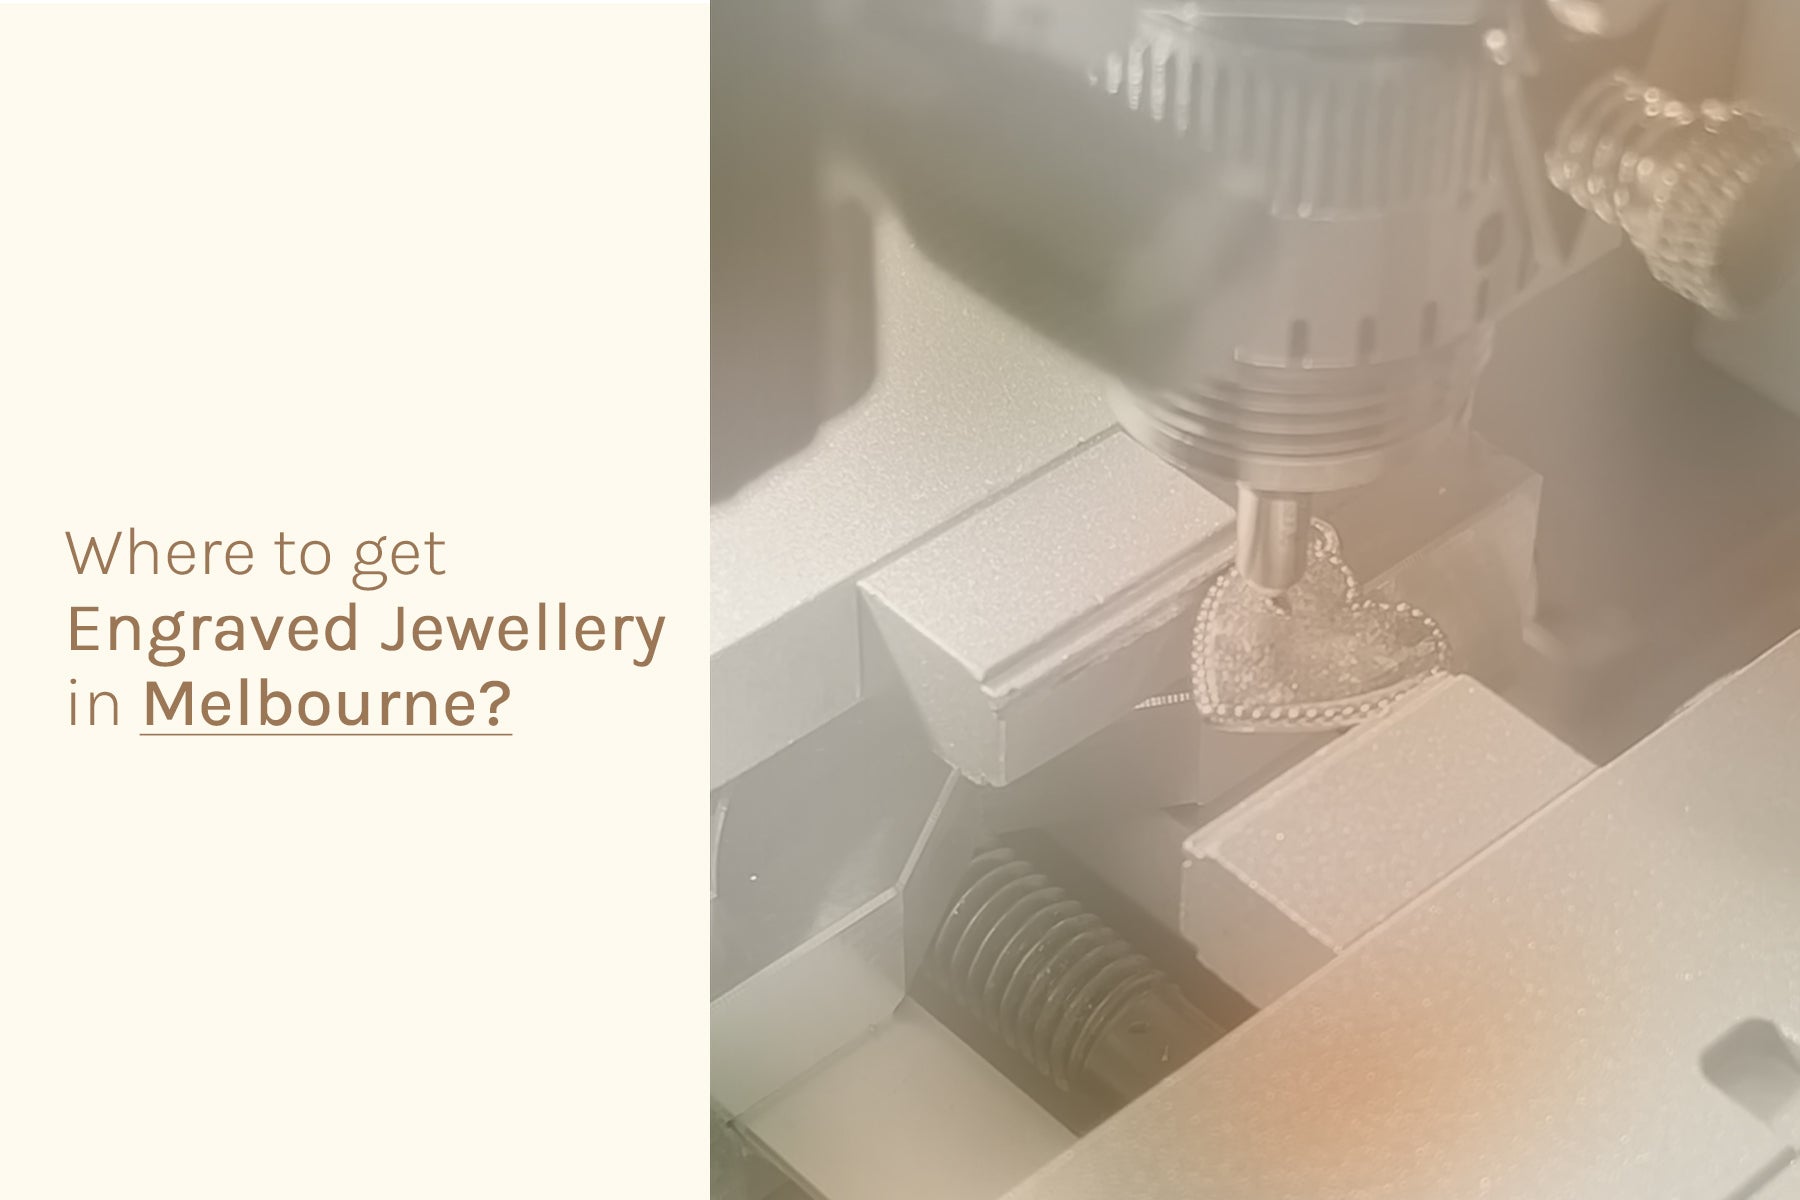 Where to get Engraved Jewellery in Melbourne?